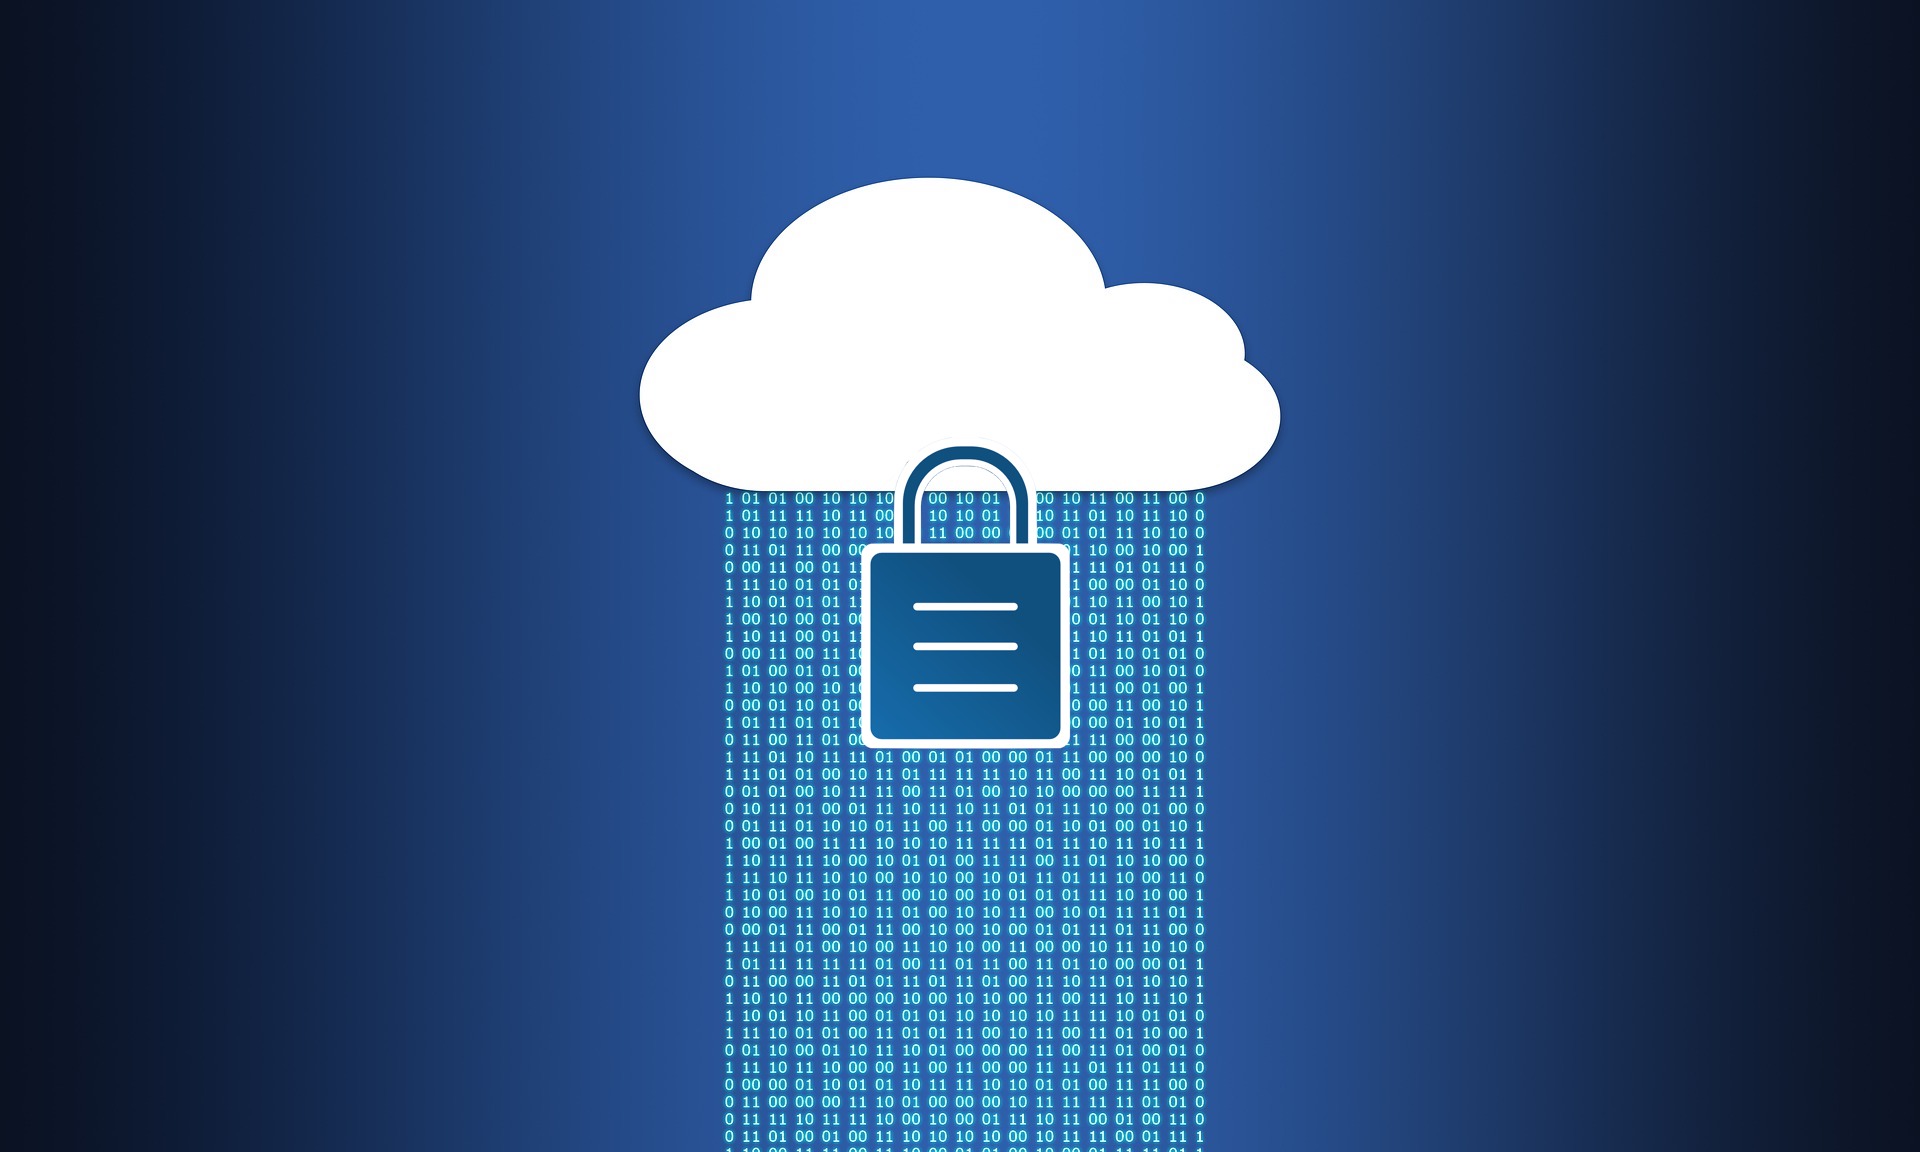 Security is a major concern for cloud computing and is being addressed in various ways.